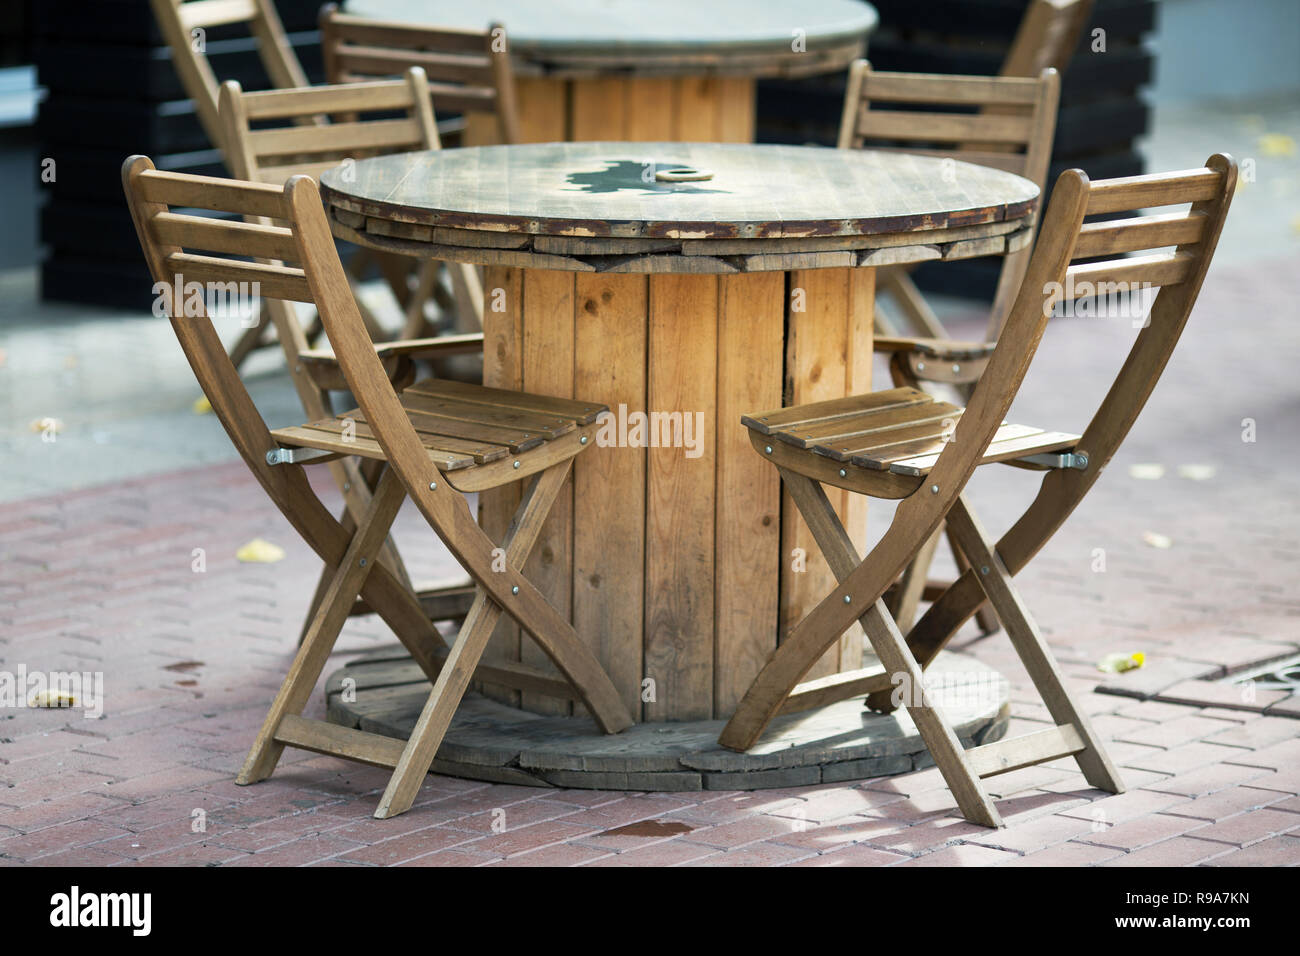 wooden chairs close-up in a street cafe Stock Photo